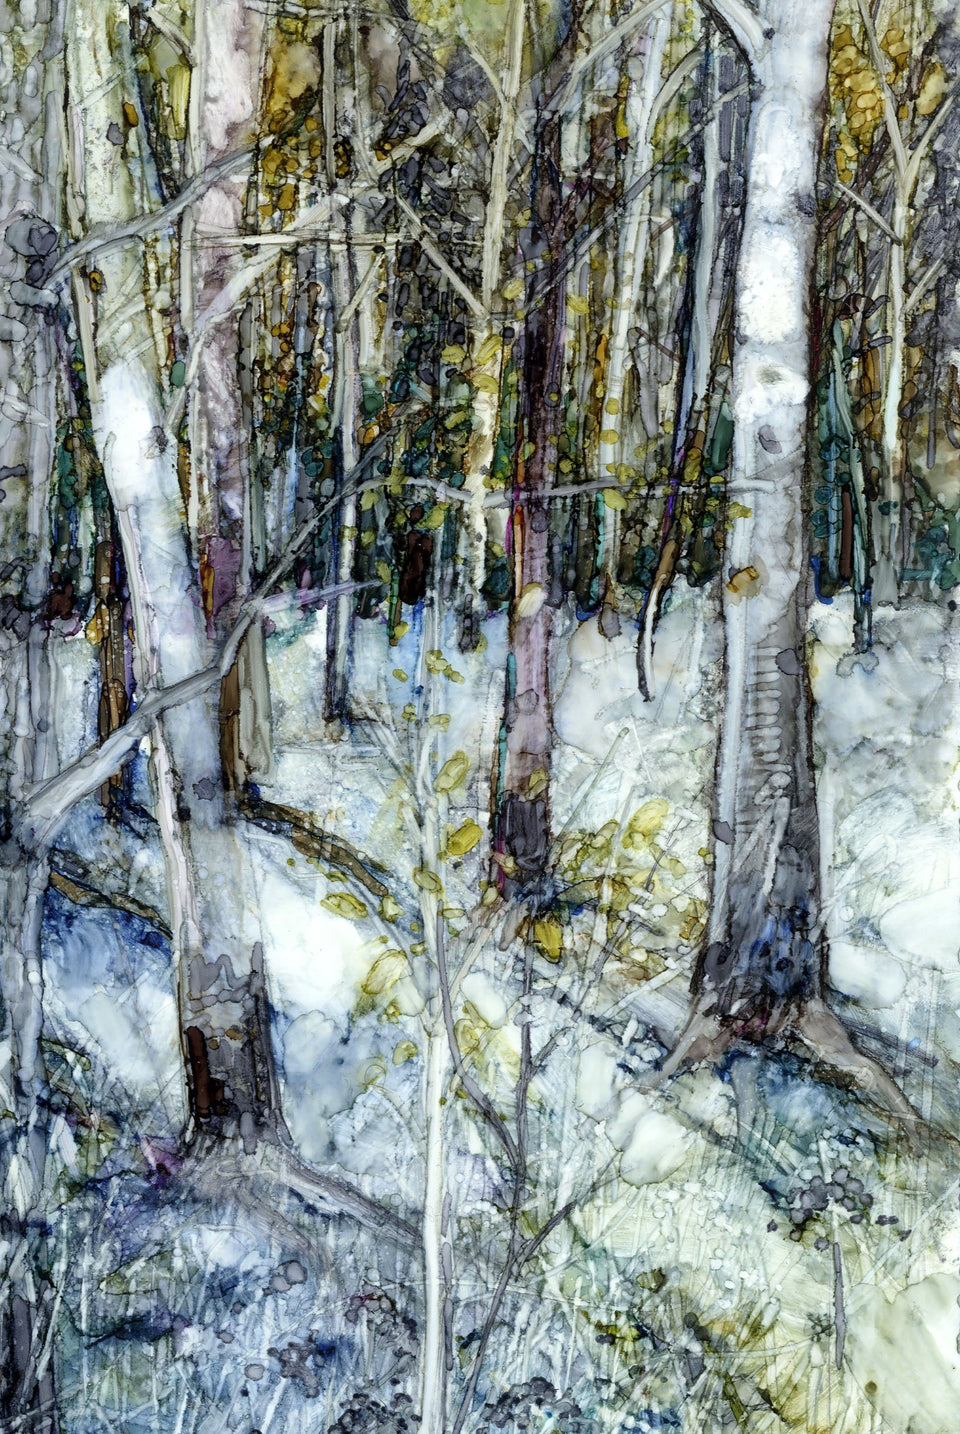 Landscape with White Birch - Print of alcohol inks by Sarah Stoker